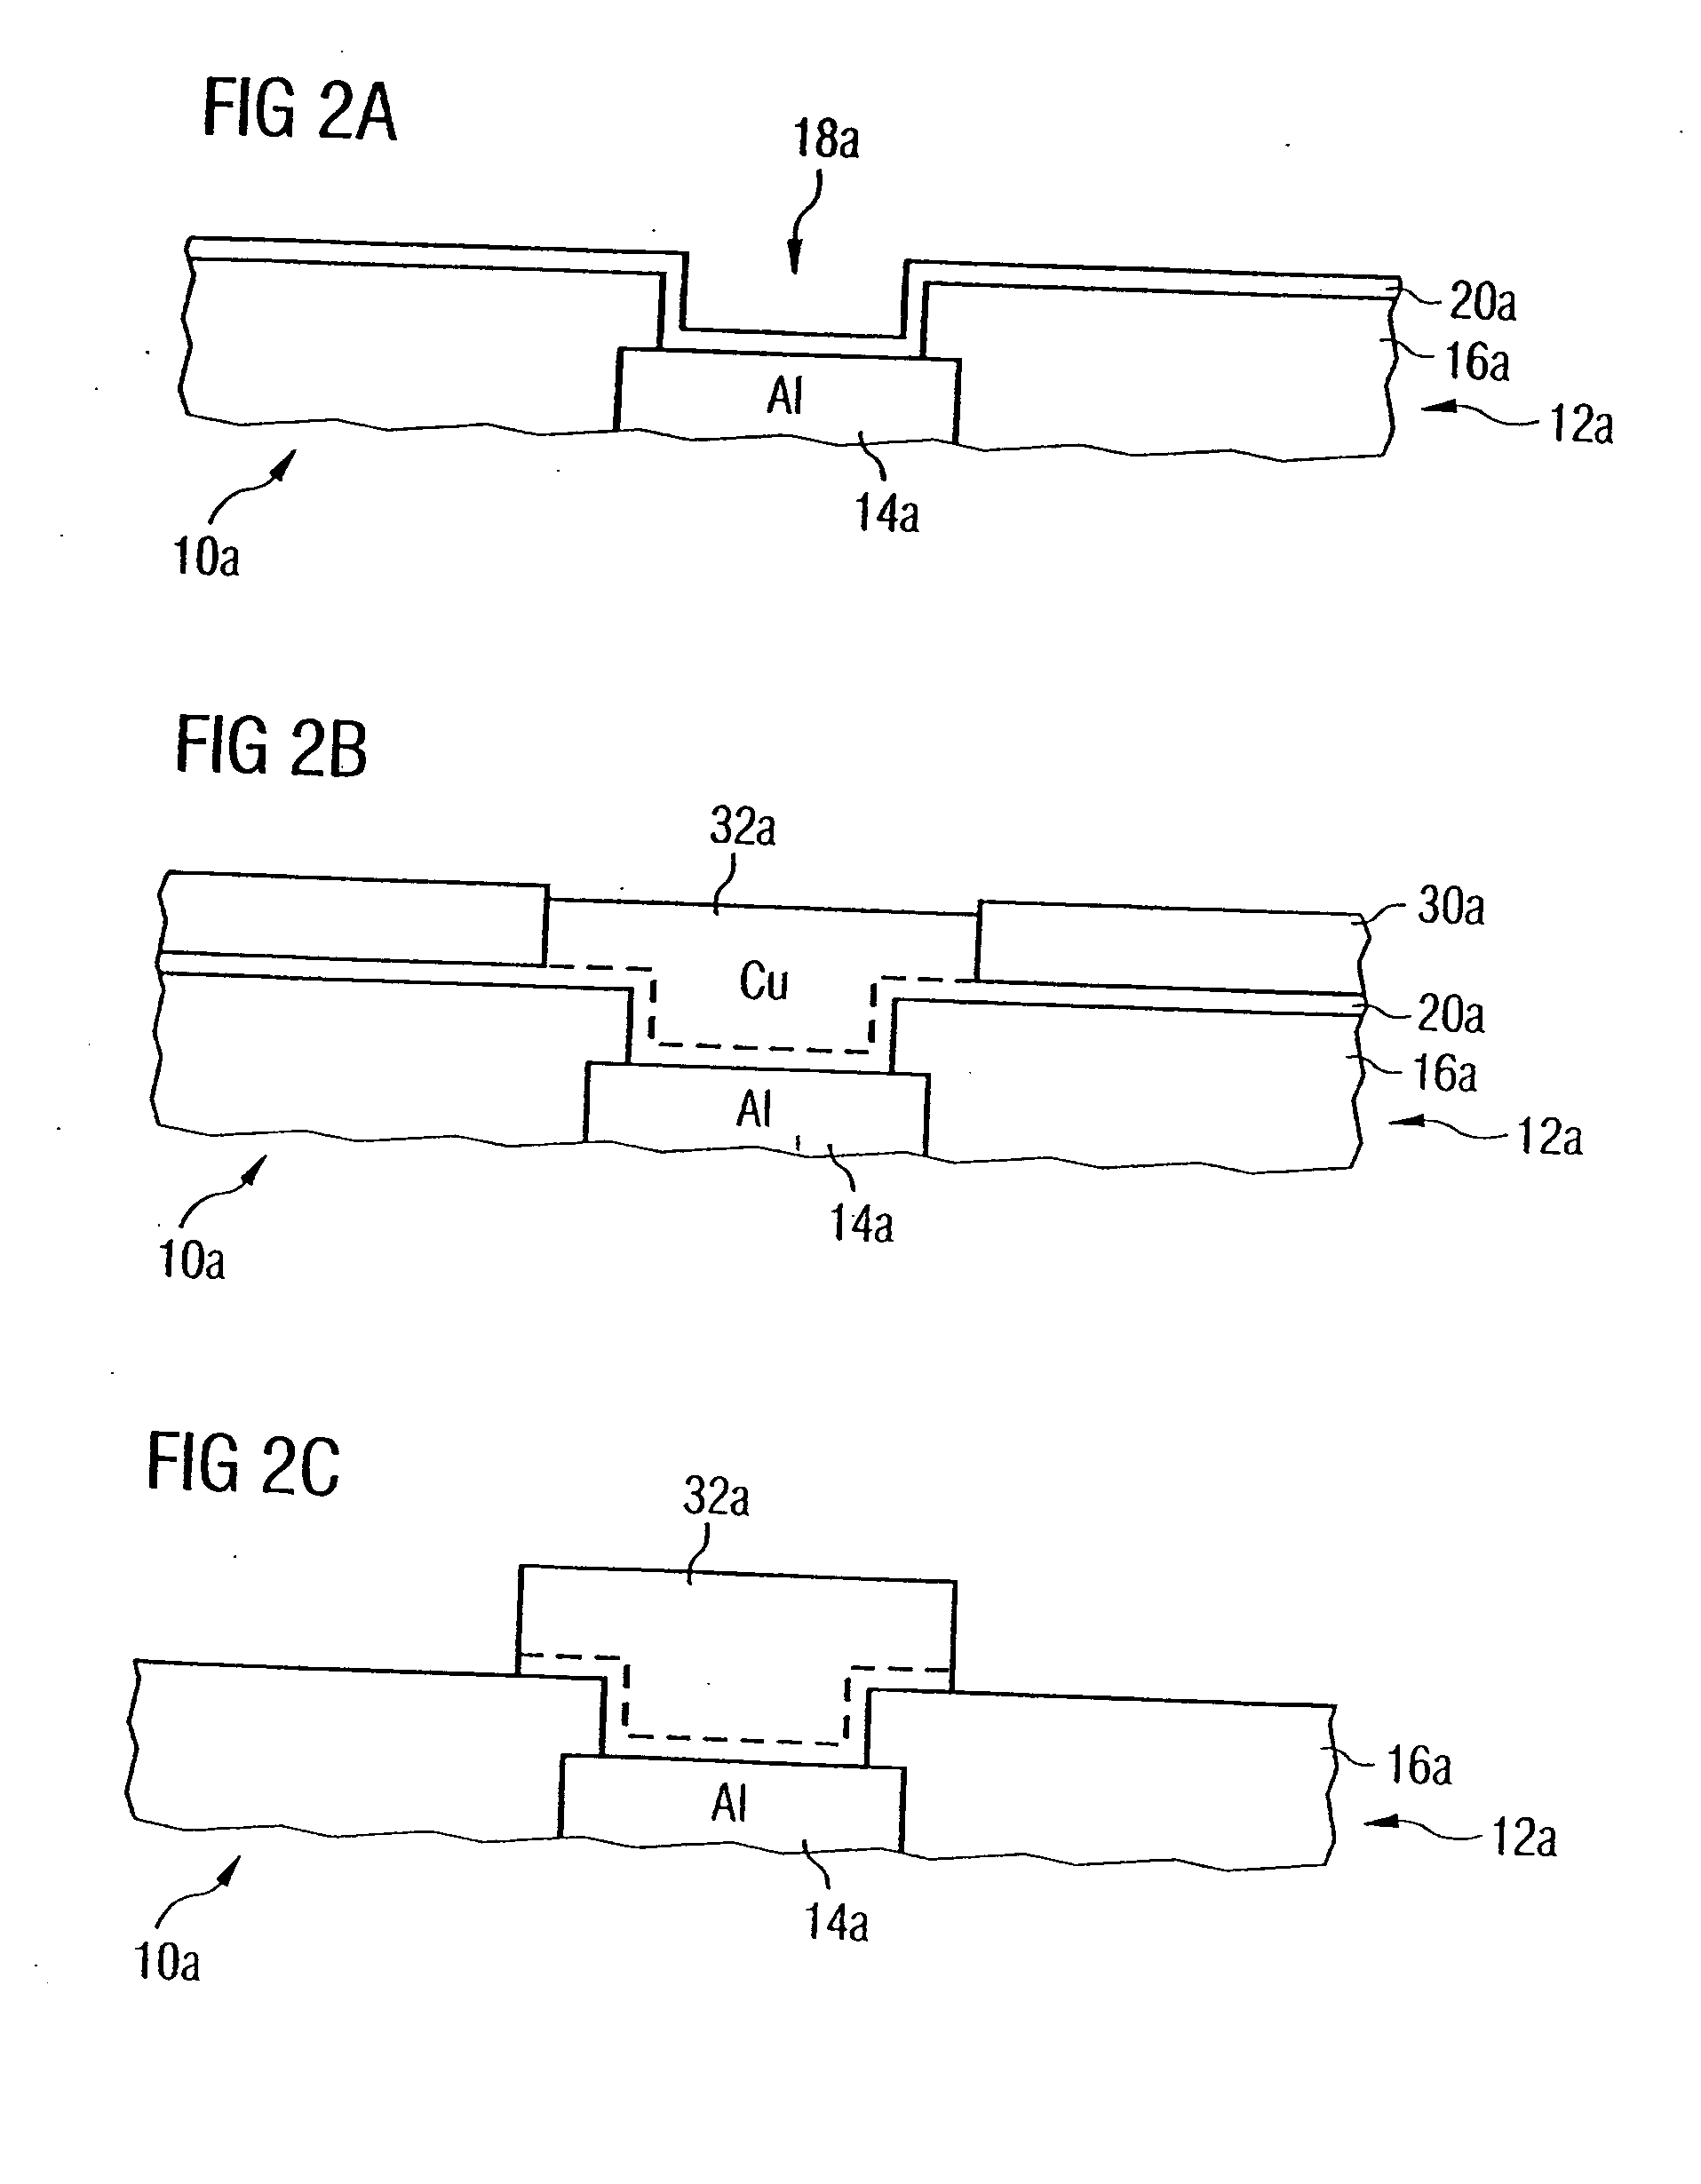 Electrodepositing a metal in integrated circuit applications